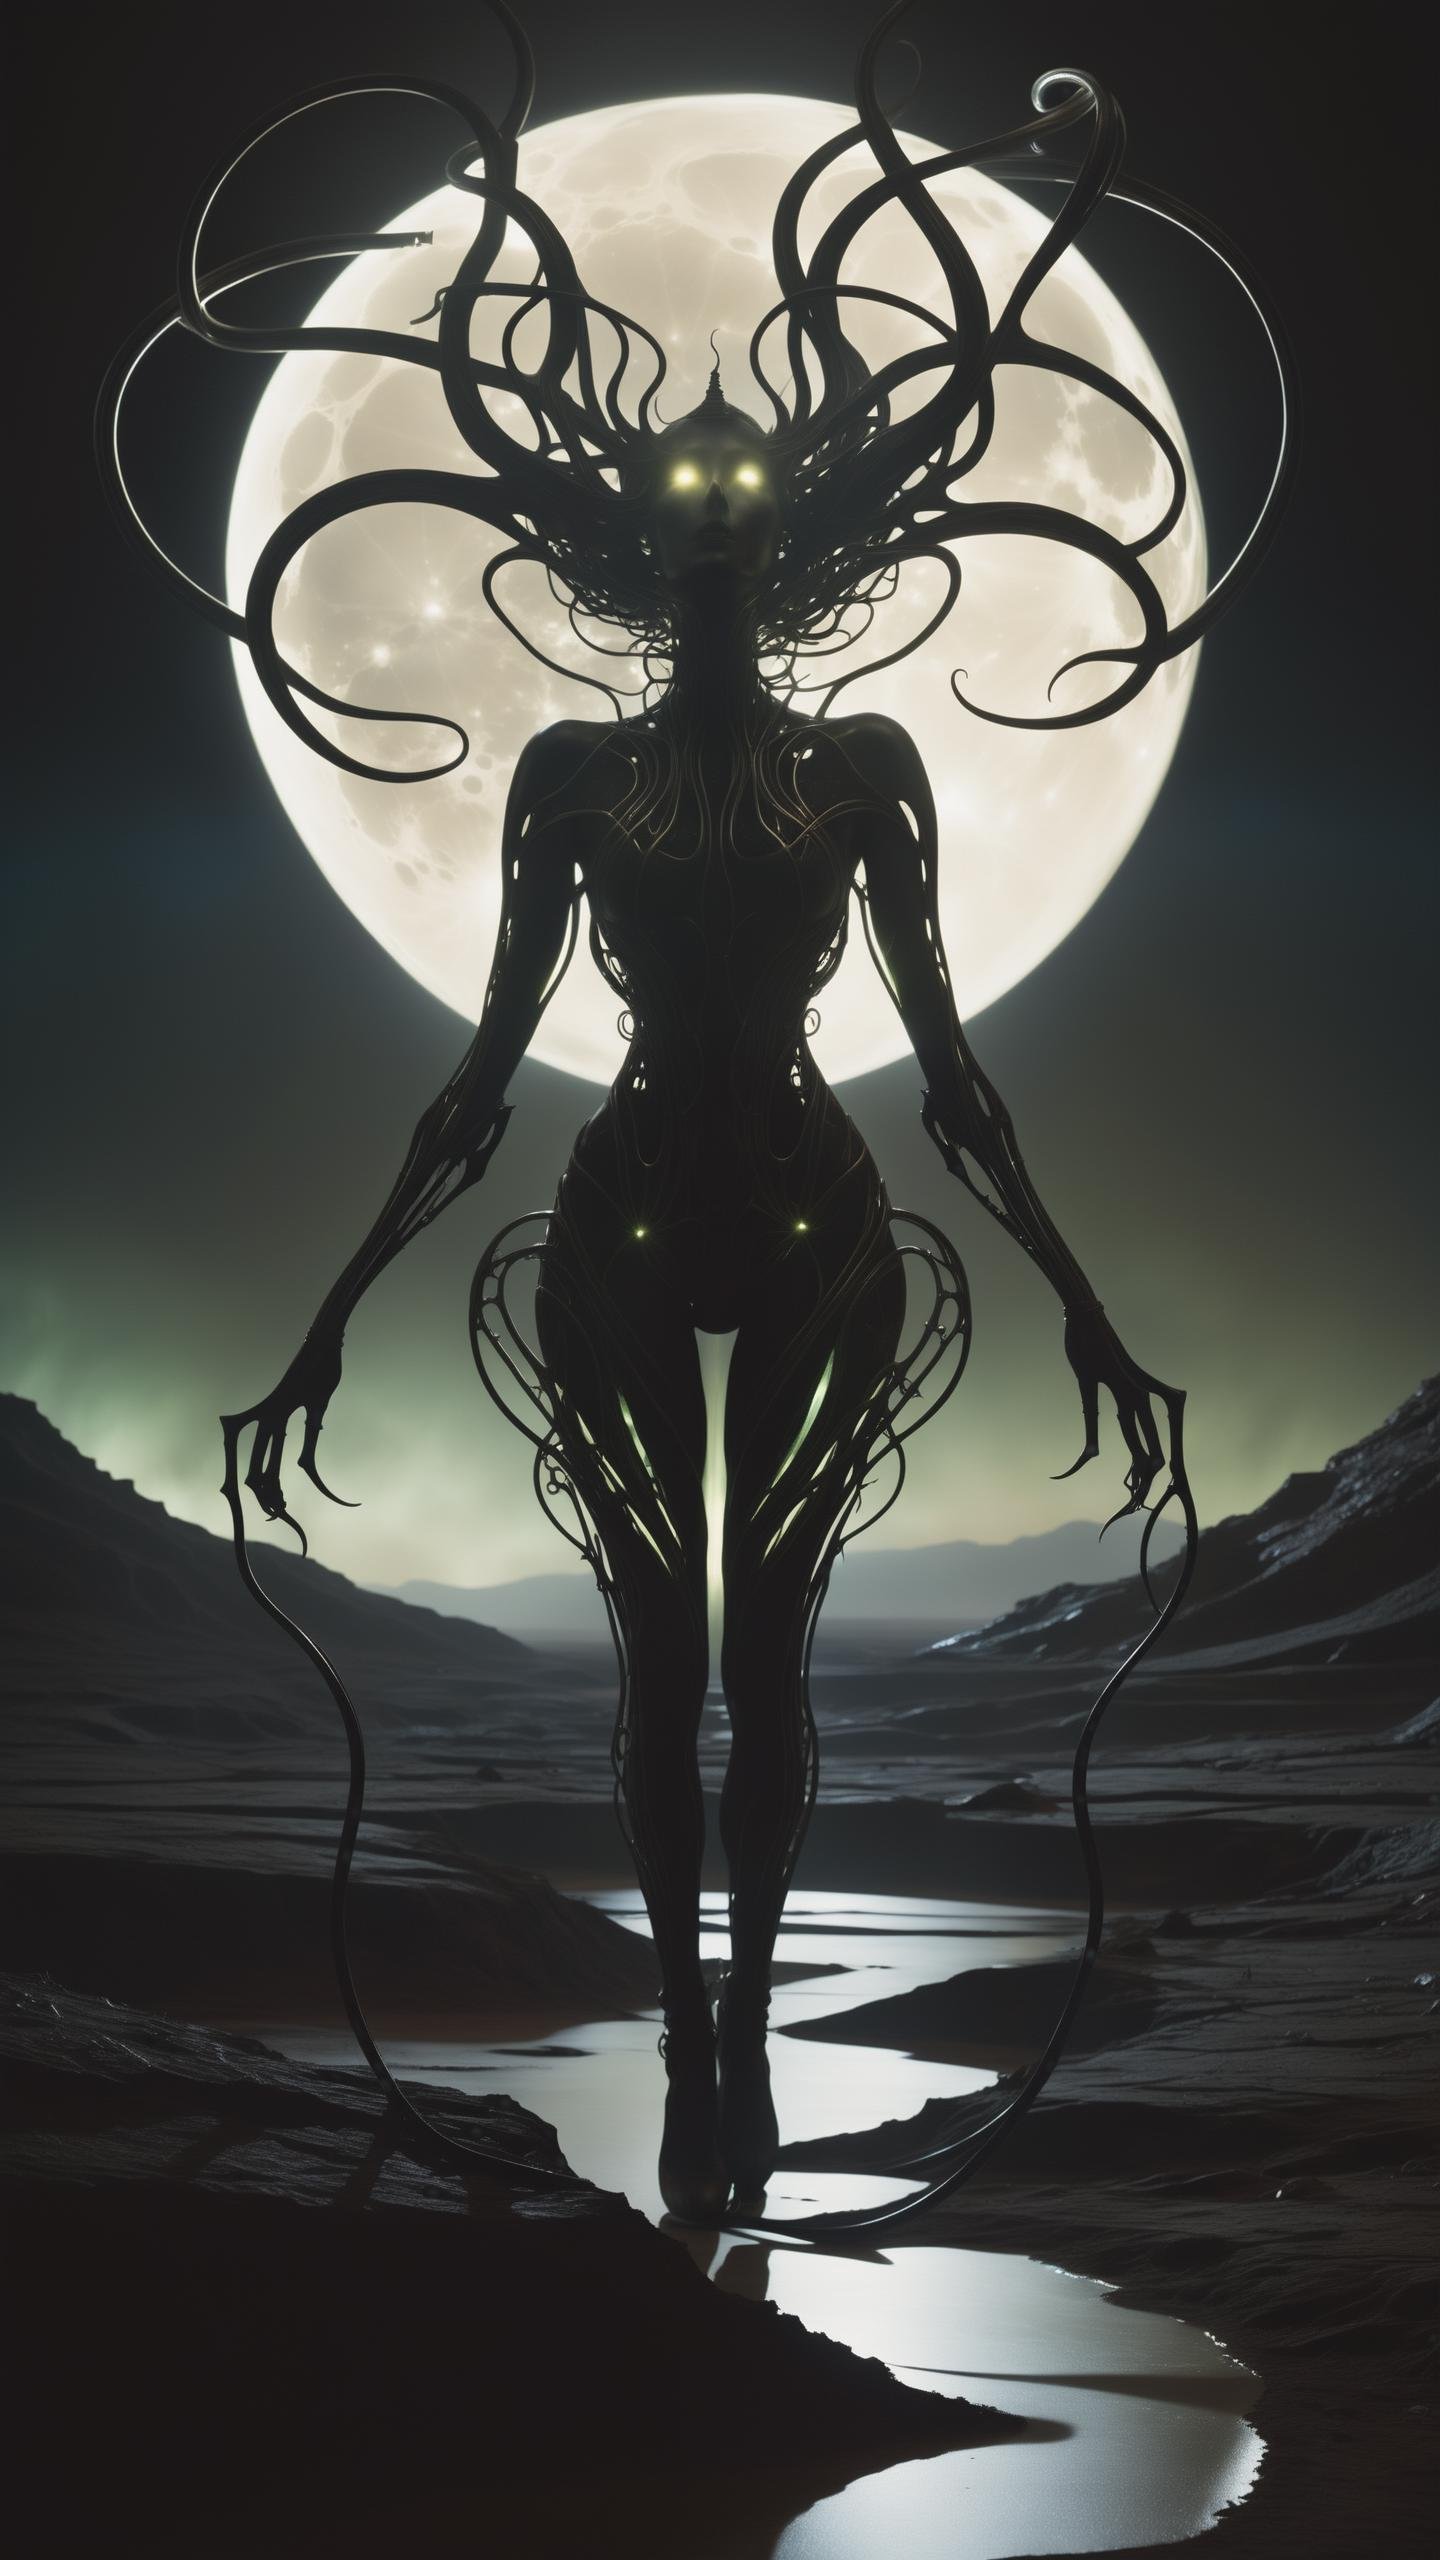 In a desolate, moonlit landscape, a lone figure emerges, their silhouette contorted and grotesque against the eerie glow. Closer inspection reveals a fusion of organic and mechanical elements—sinister tendrils of pulsating flesh intertwining with cold, metallic structures. The figure's skin appears as if it's unraveling, revealing glimpses of something otherworldly beneath. The air is thick with an otherworldly hum, and a sickly, iridescent light emanates from the aberrant fusion. This image prompt invites exploration into the realm of body horror, prompting creative minds to unravel the unsettling narrative within this grotesque tableau